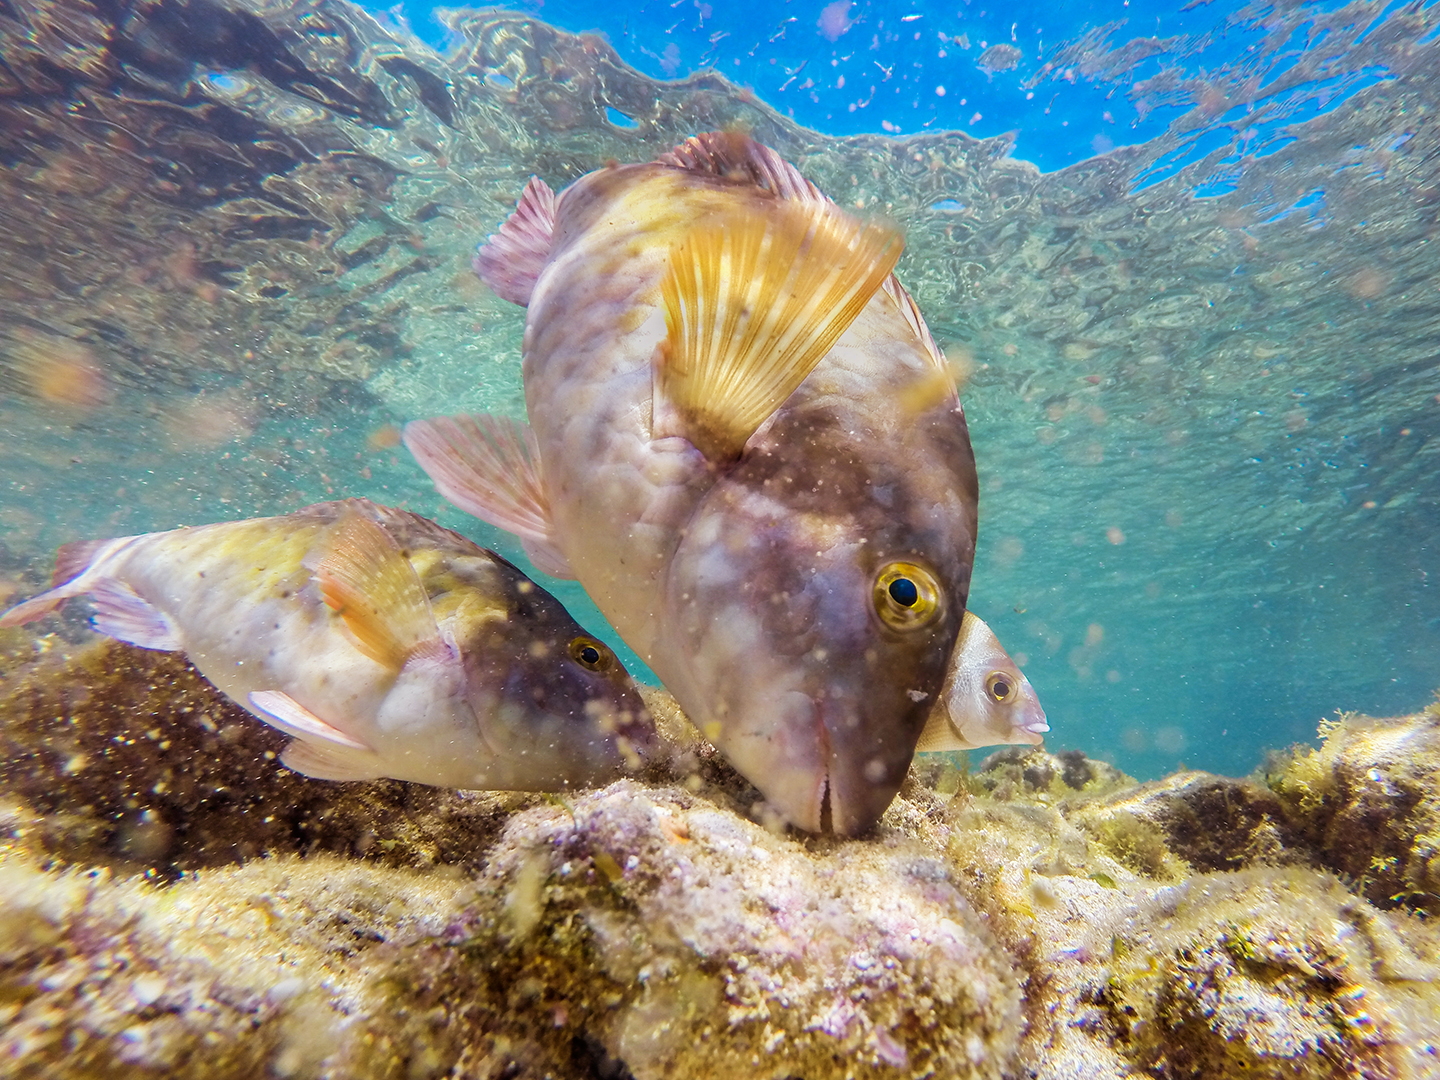 Parrotfish in the Canary Islands